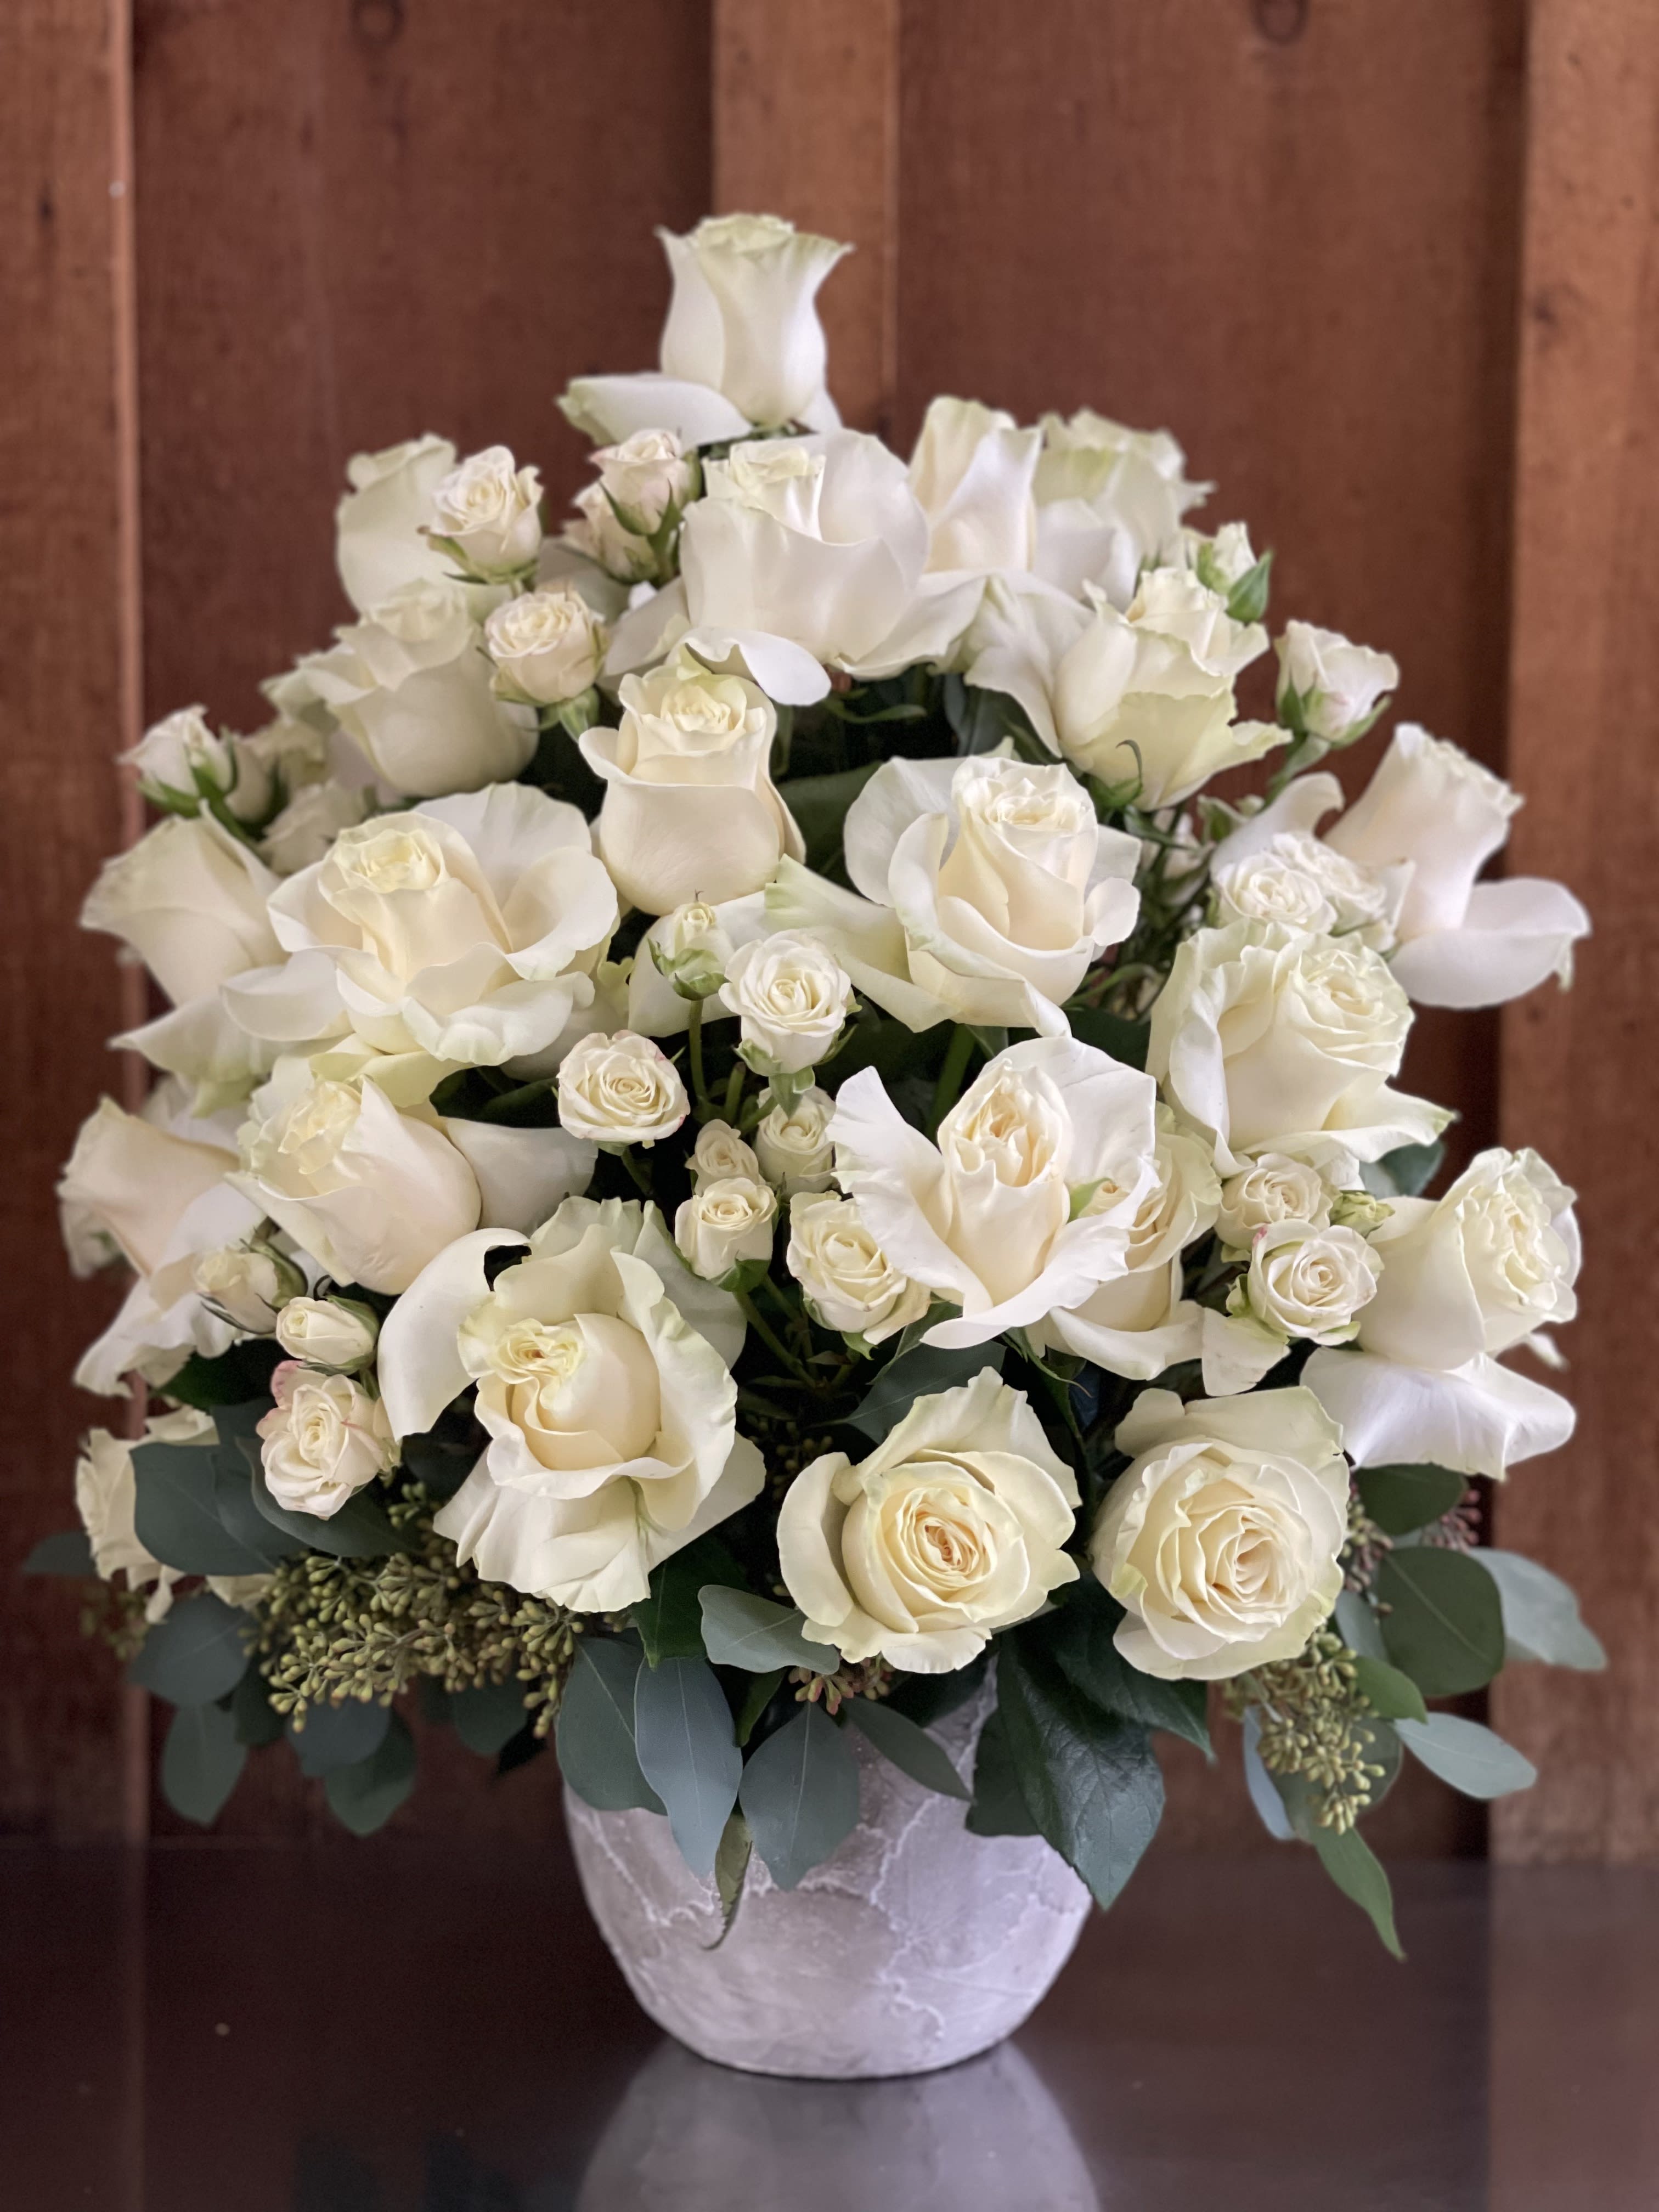 Pure Beauty  - Pure Beauty says it all for this  arrangement of 2 dozen white roses and spray roses. Perfect for any occasion 